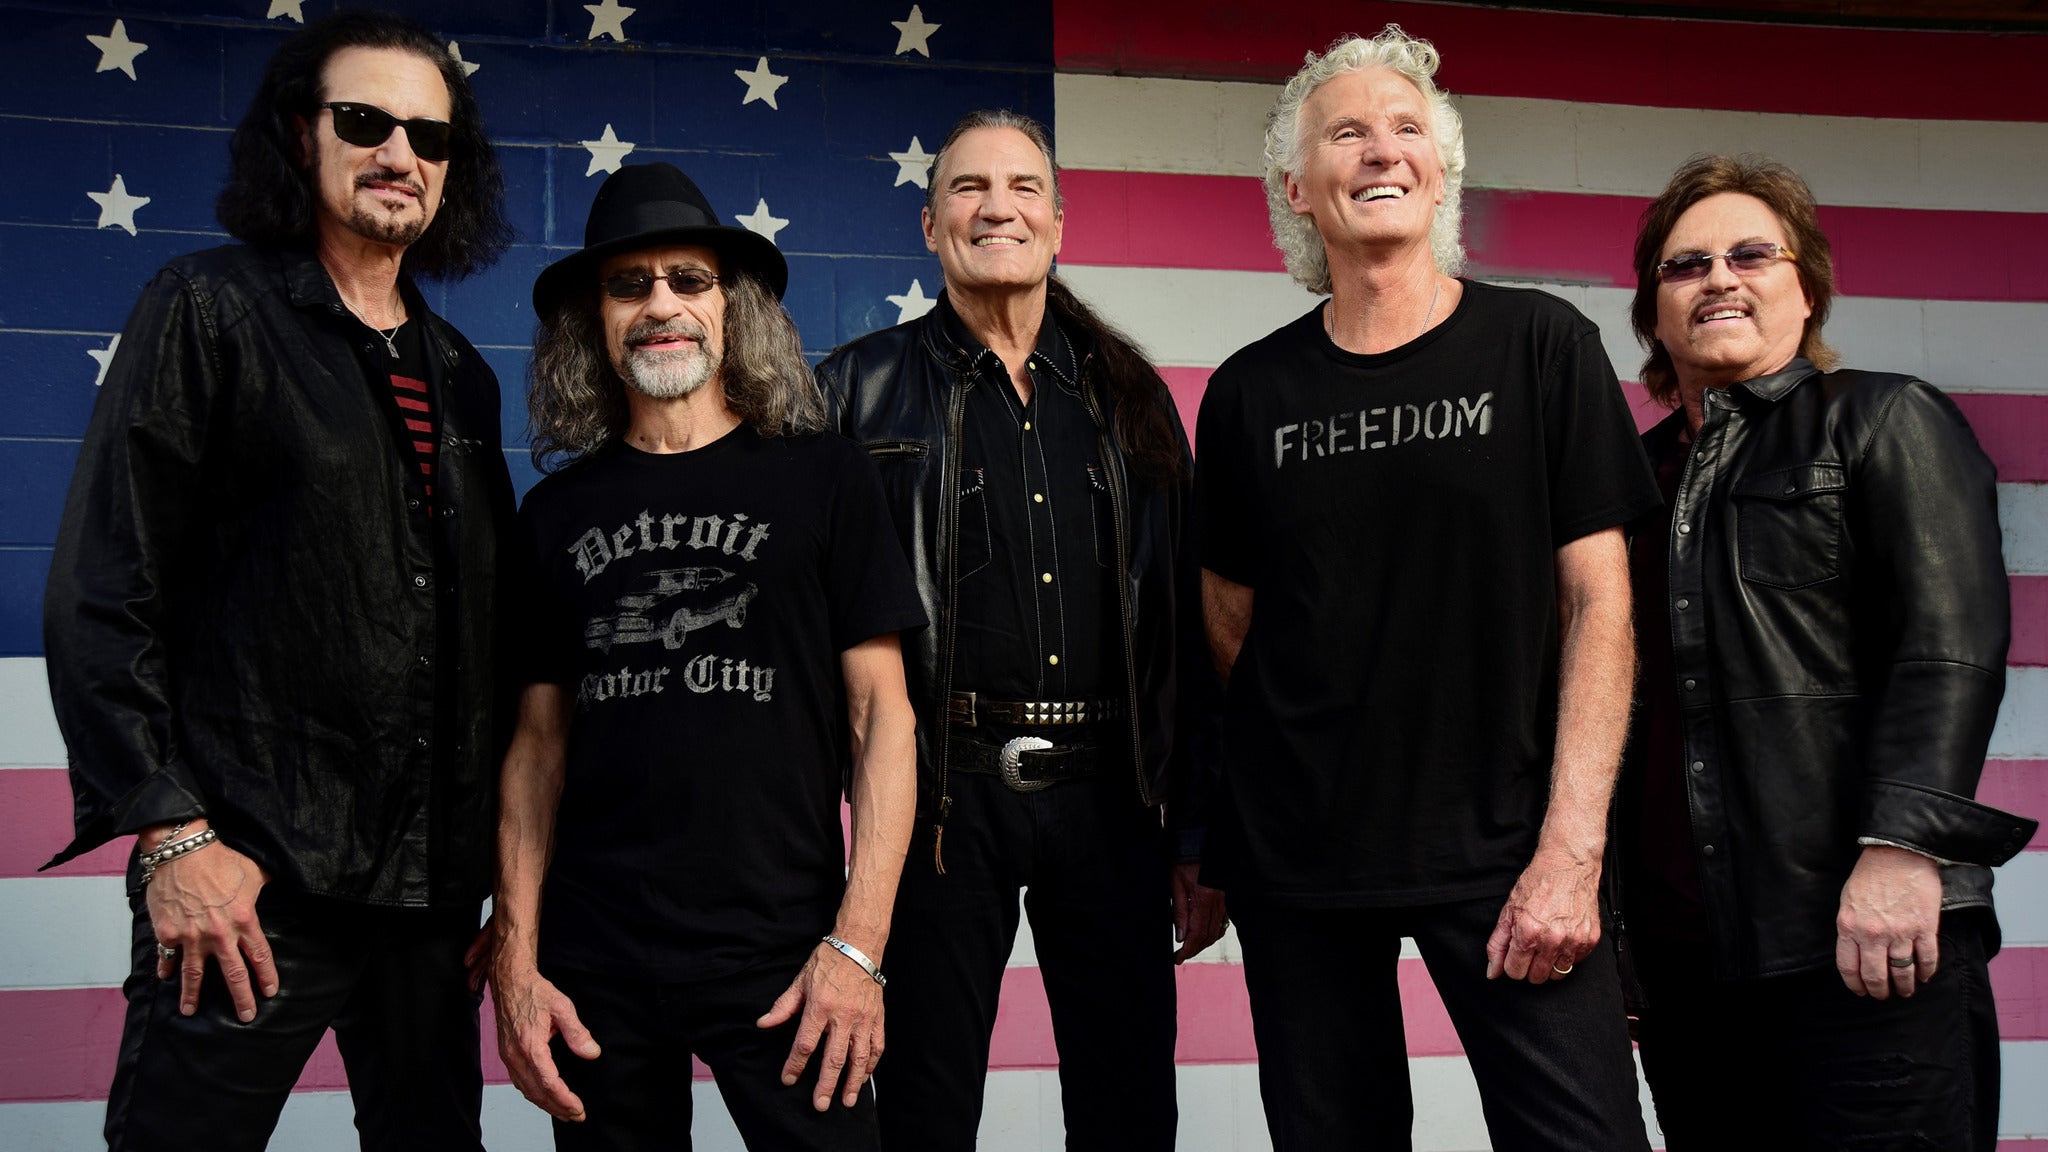 Rock From The Heart: Featuring Grand Funk Railroad